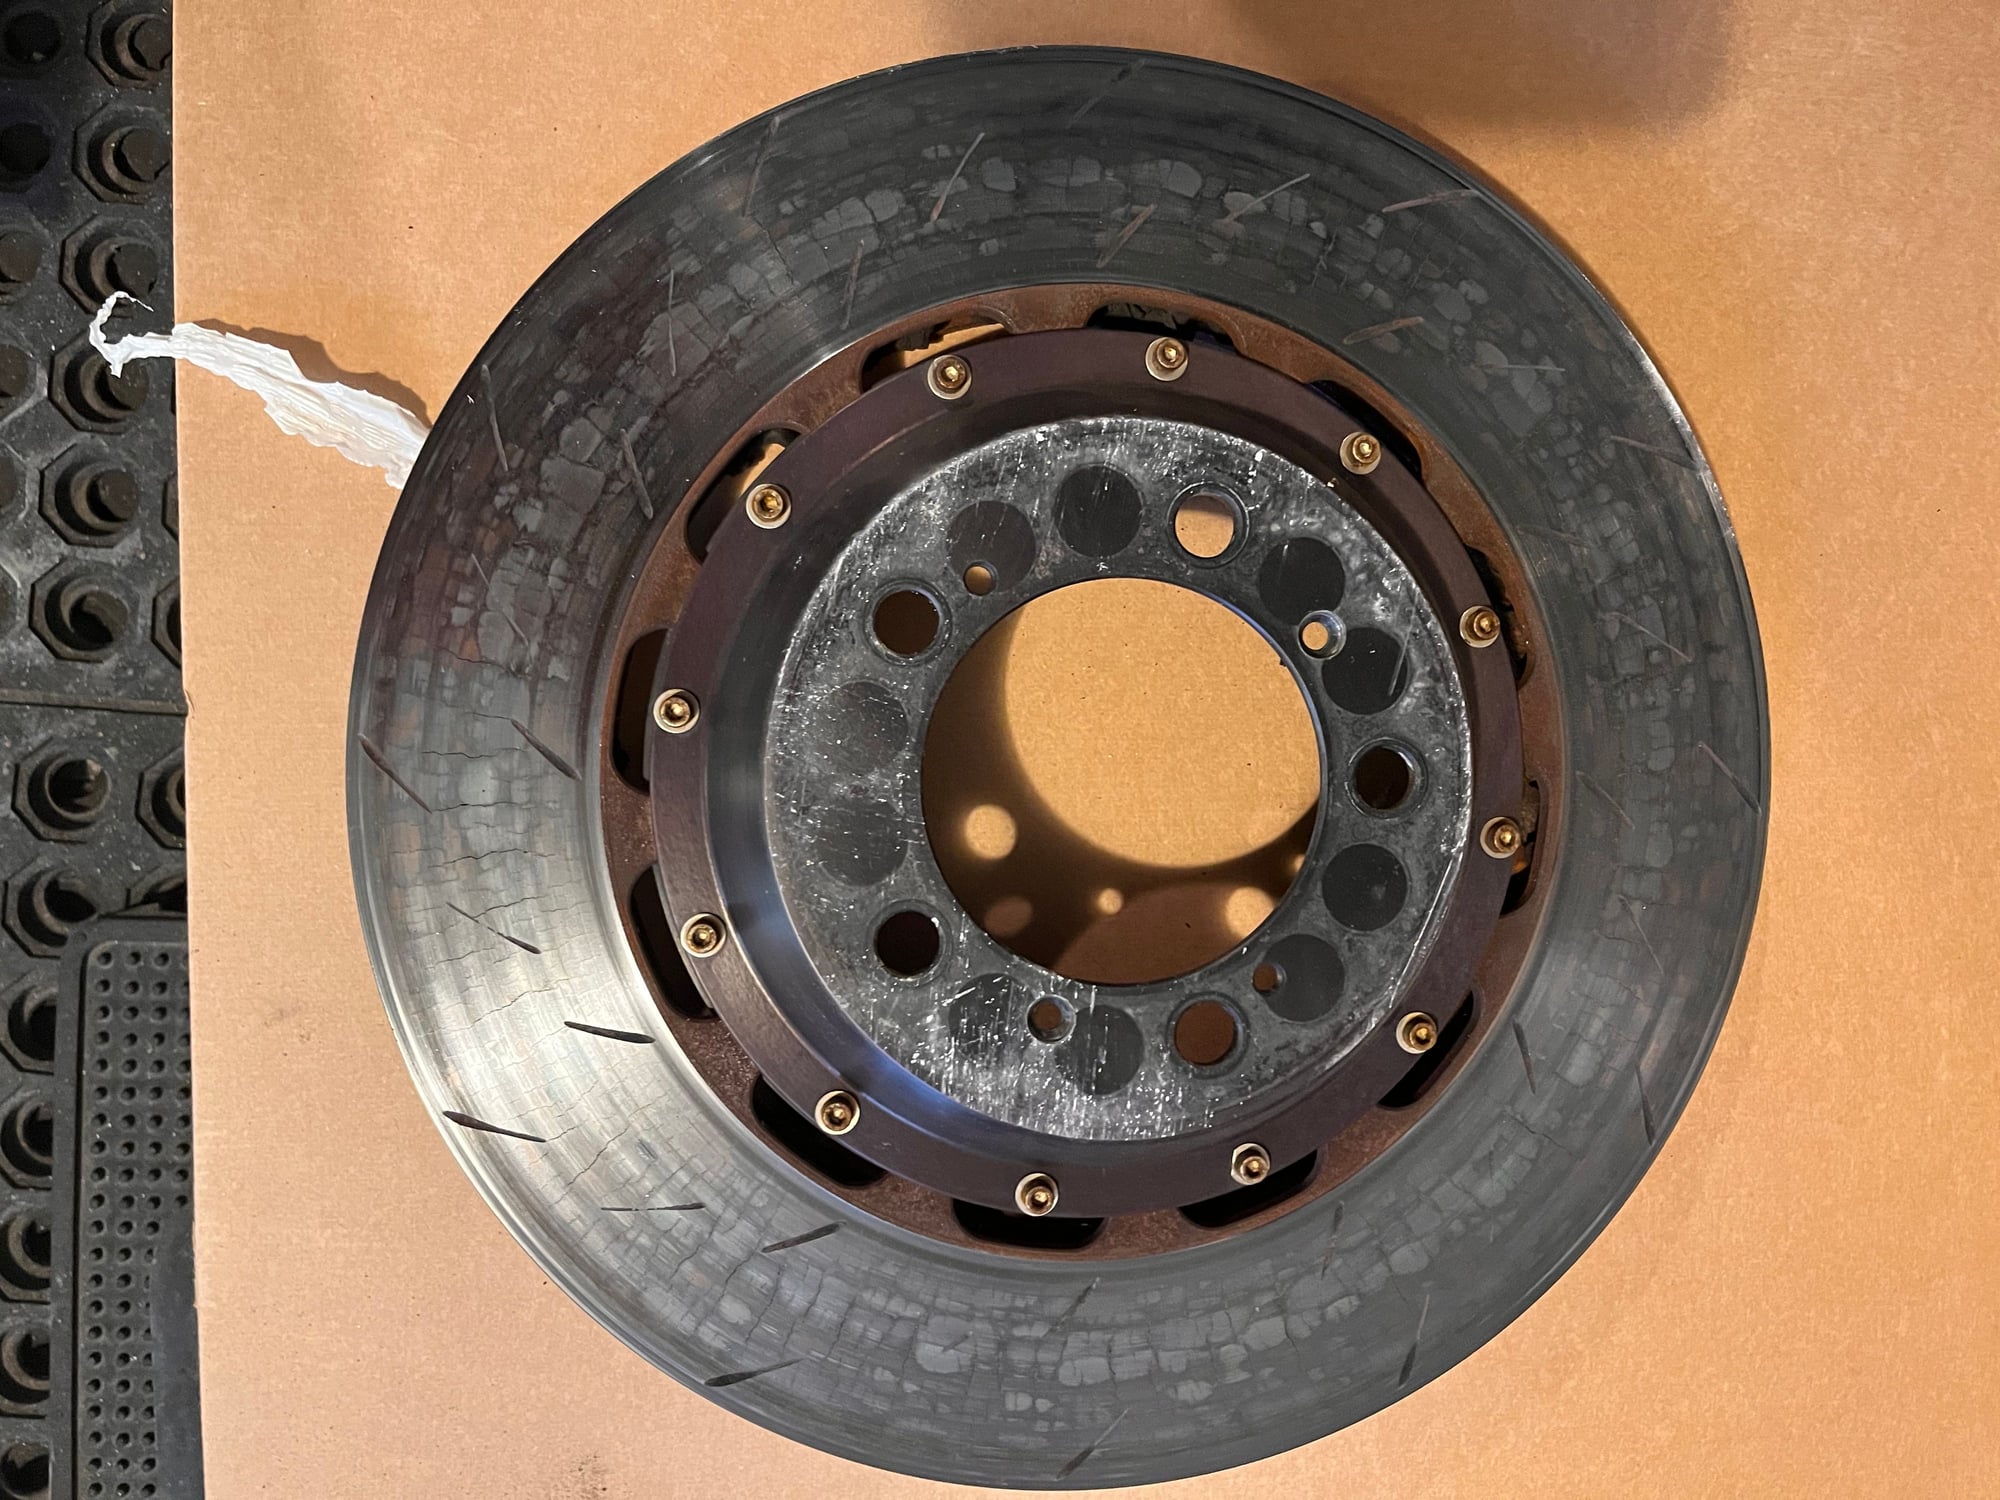 Accessories - GT3 997.2 parts and wheels for sale - Used - 2010 to 2011 Porsche GT3 - Champlain, NY 12919, United States